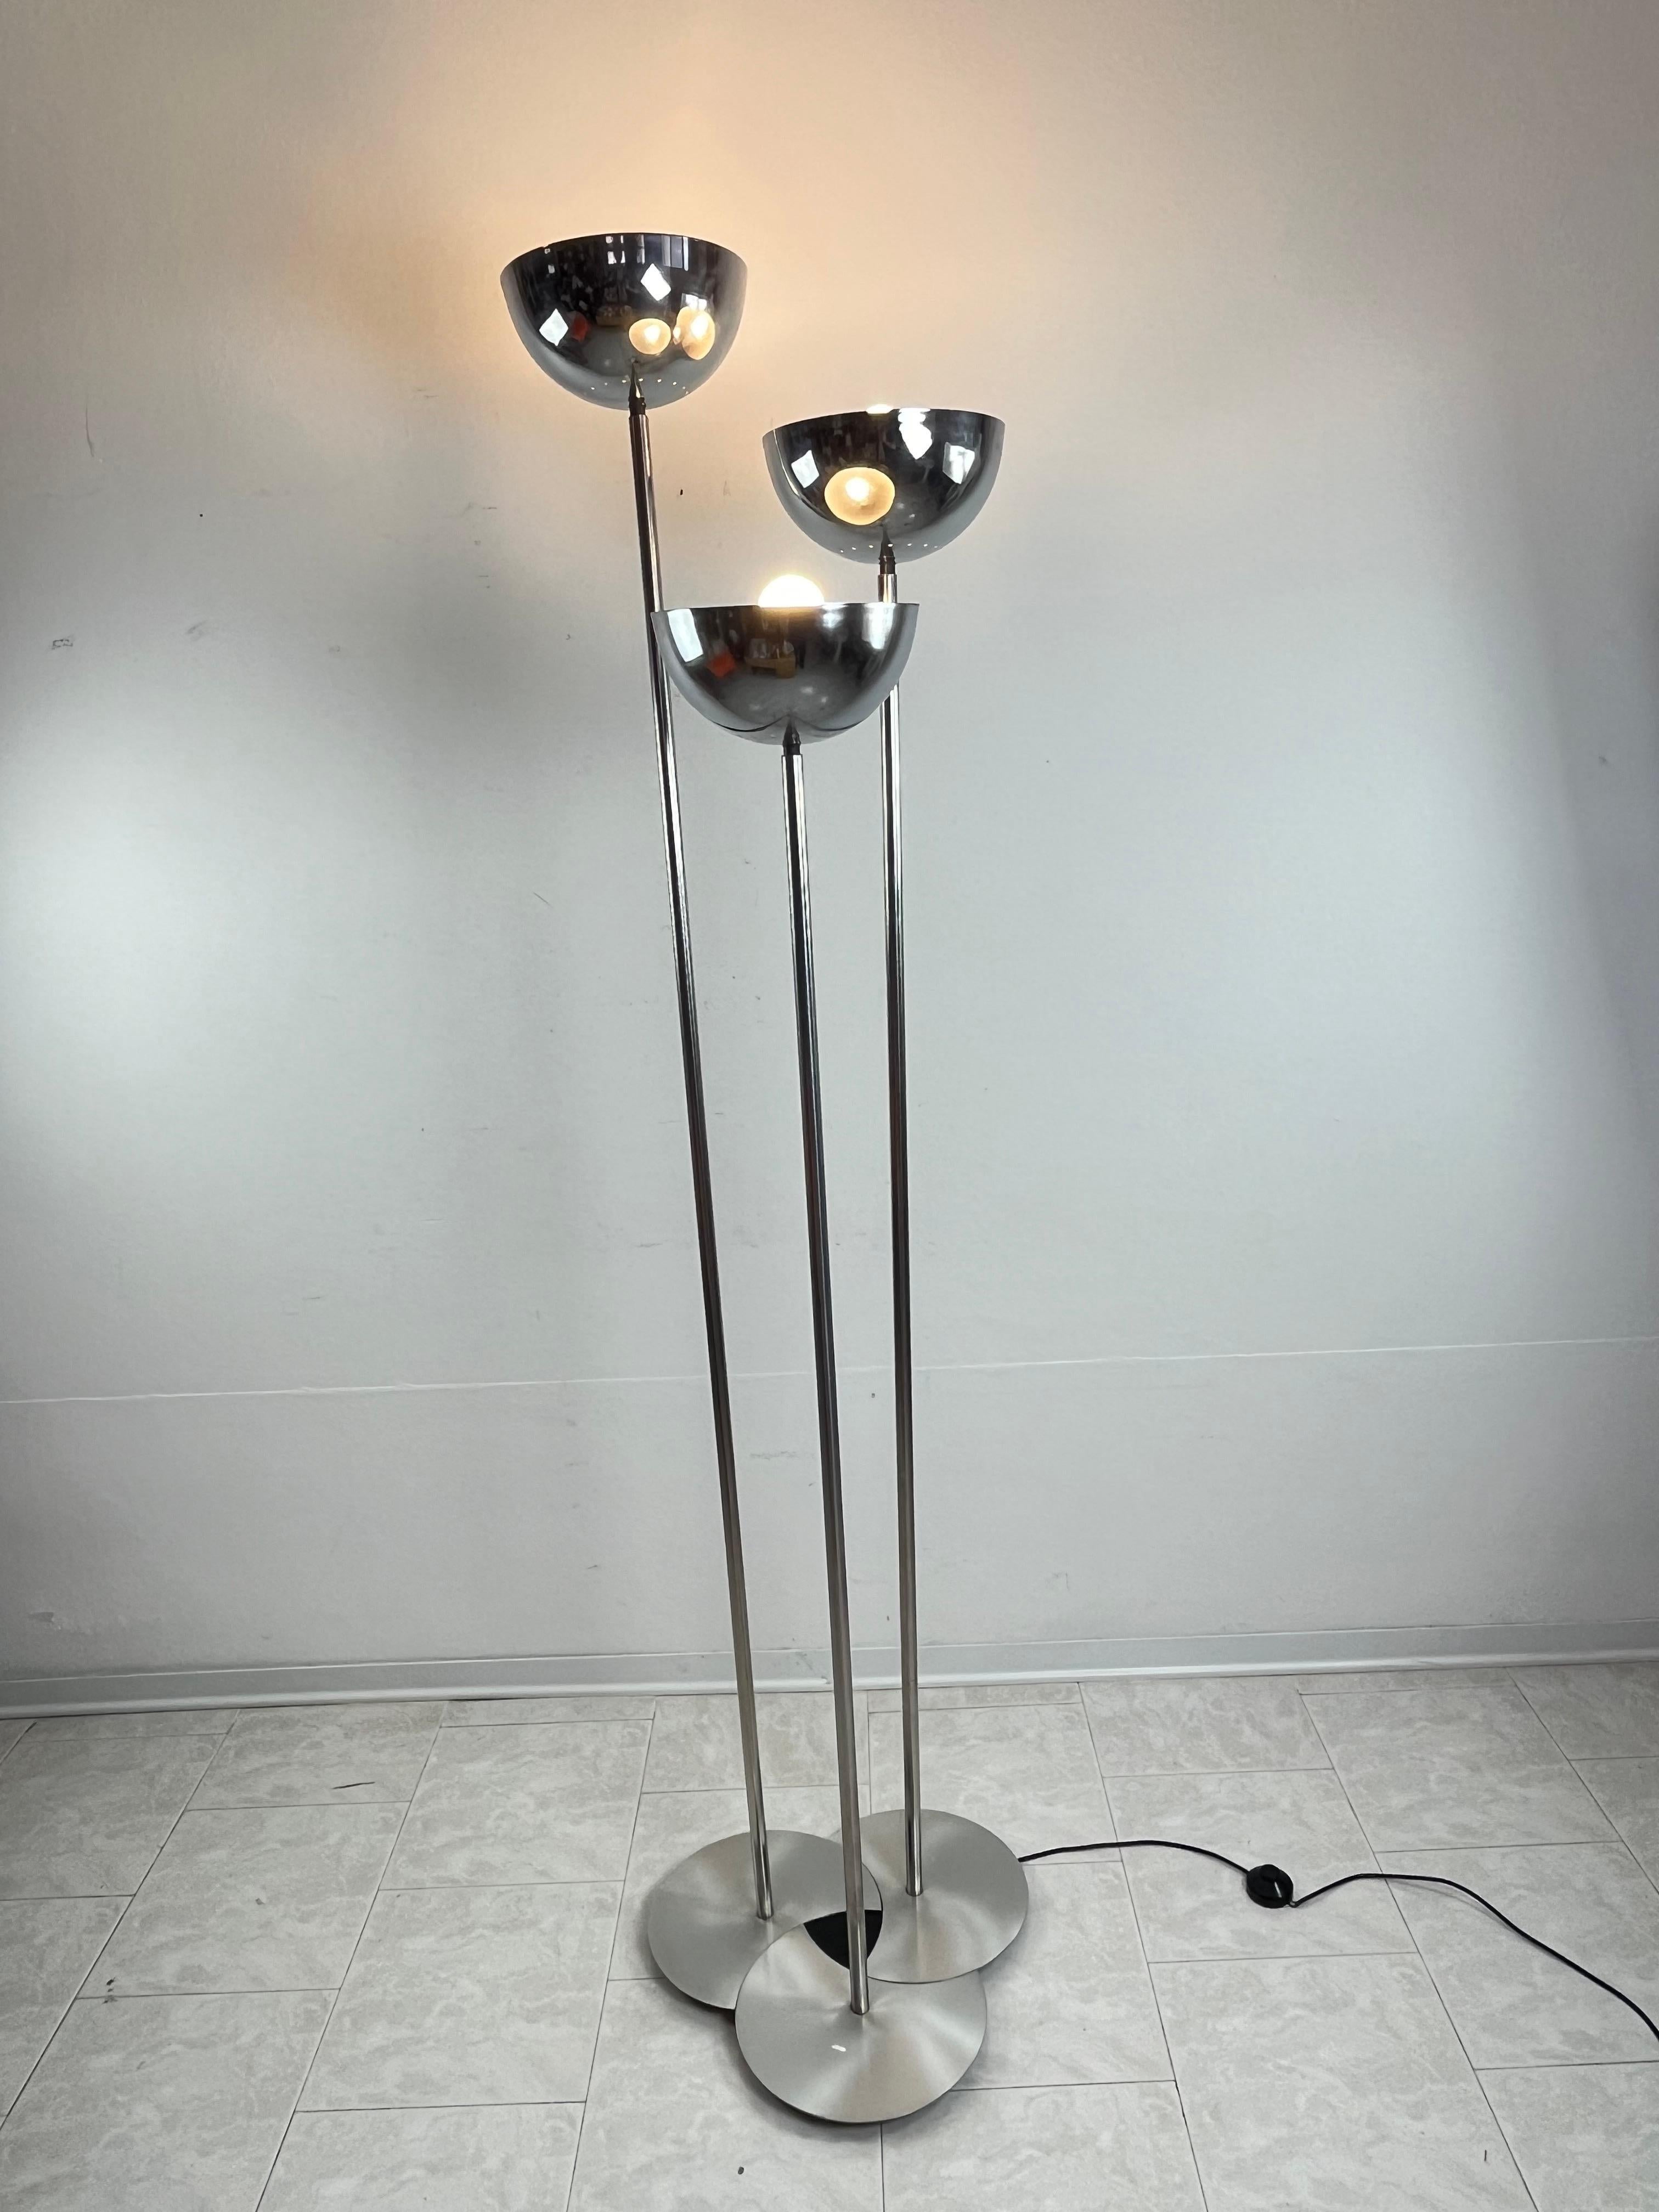 3-light floor lamp Lamperti chromed steel Italian design Mid-Century 1968
Excellent condition, intact and functional, small signs of aging.
E 27 lamps.